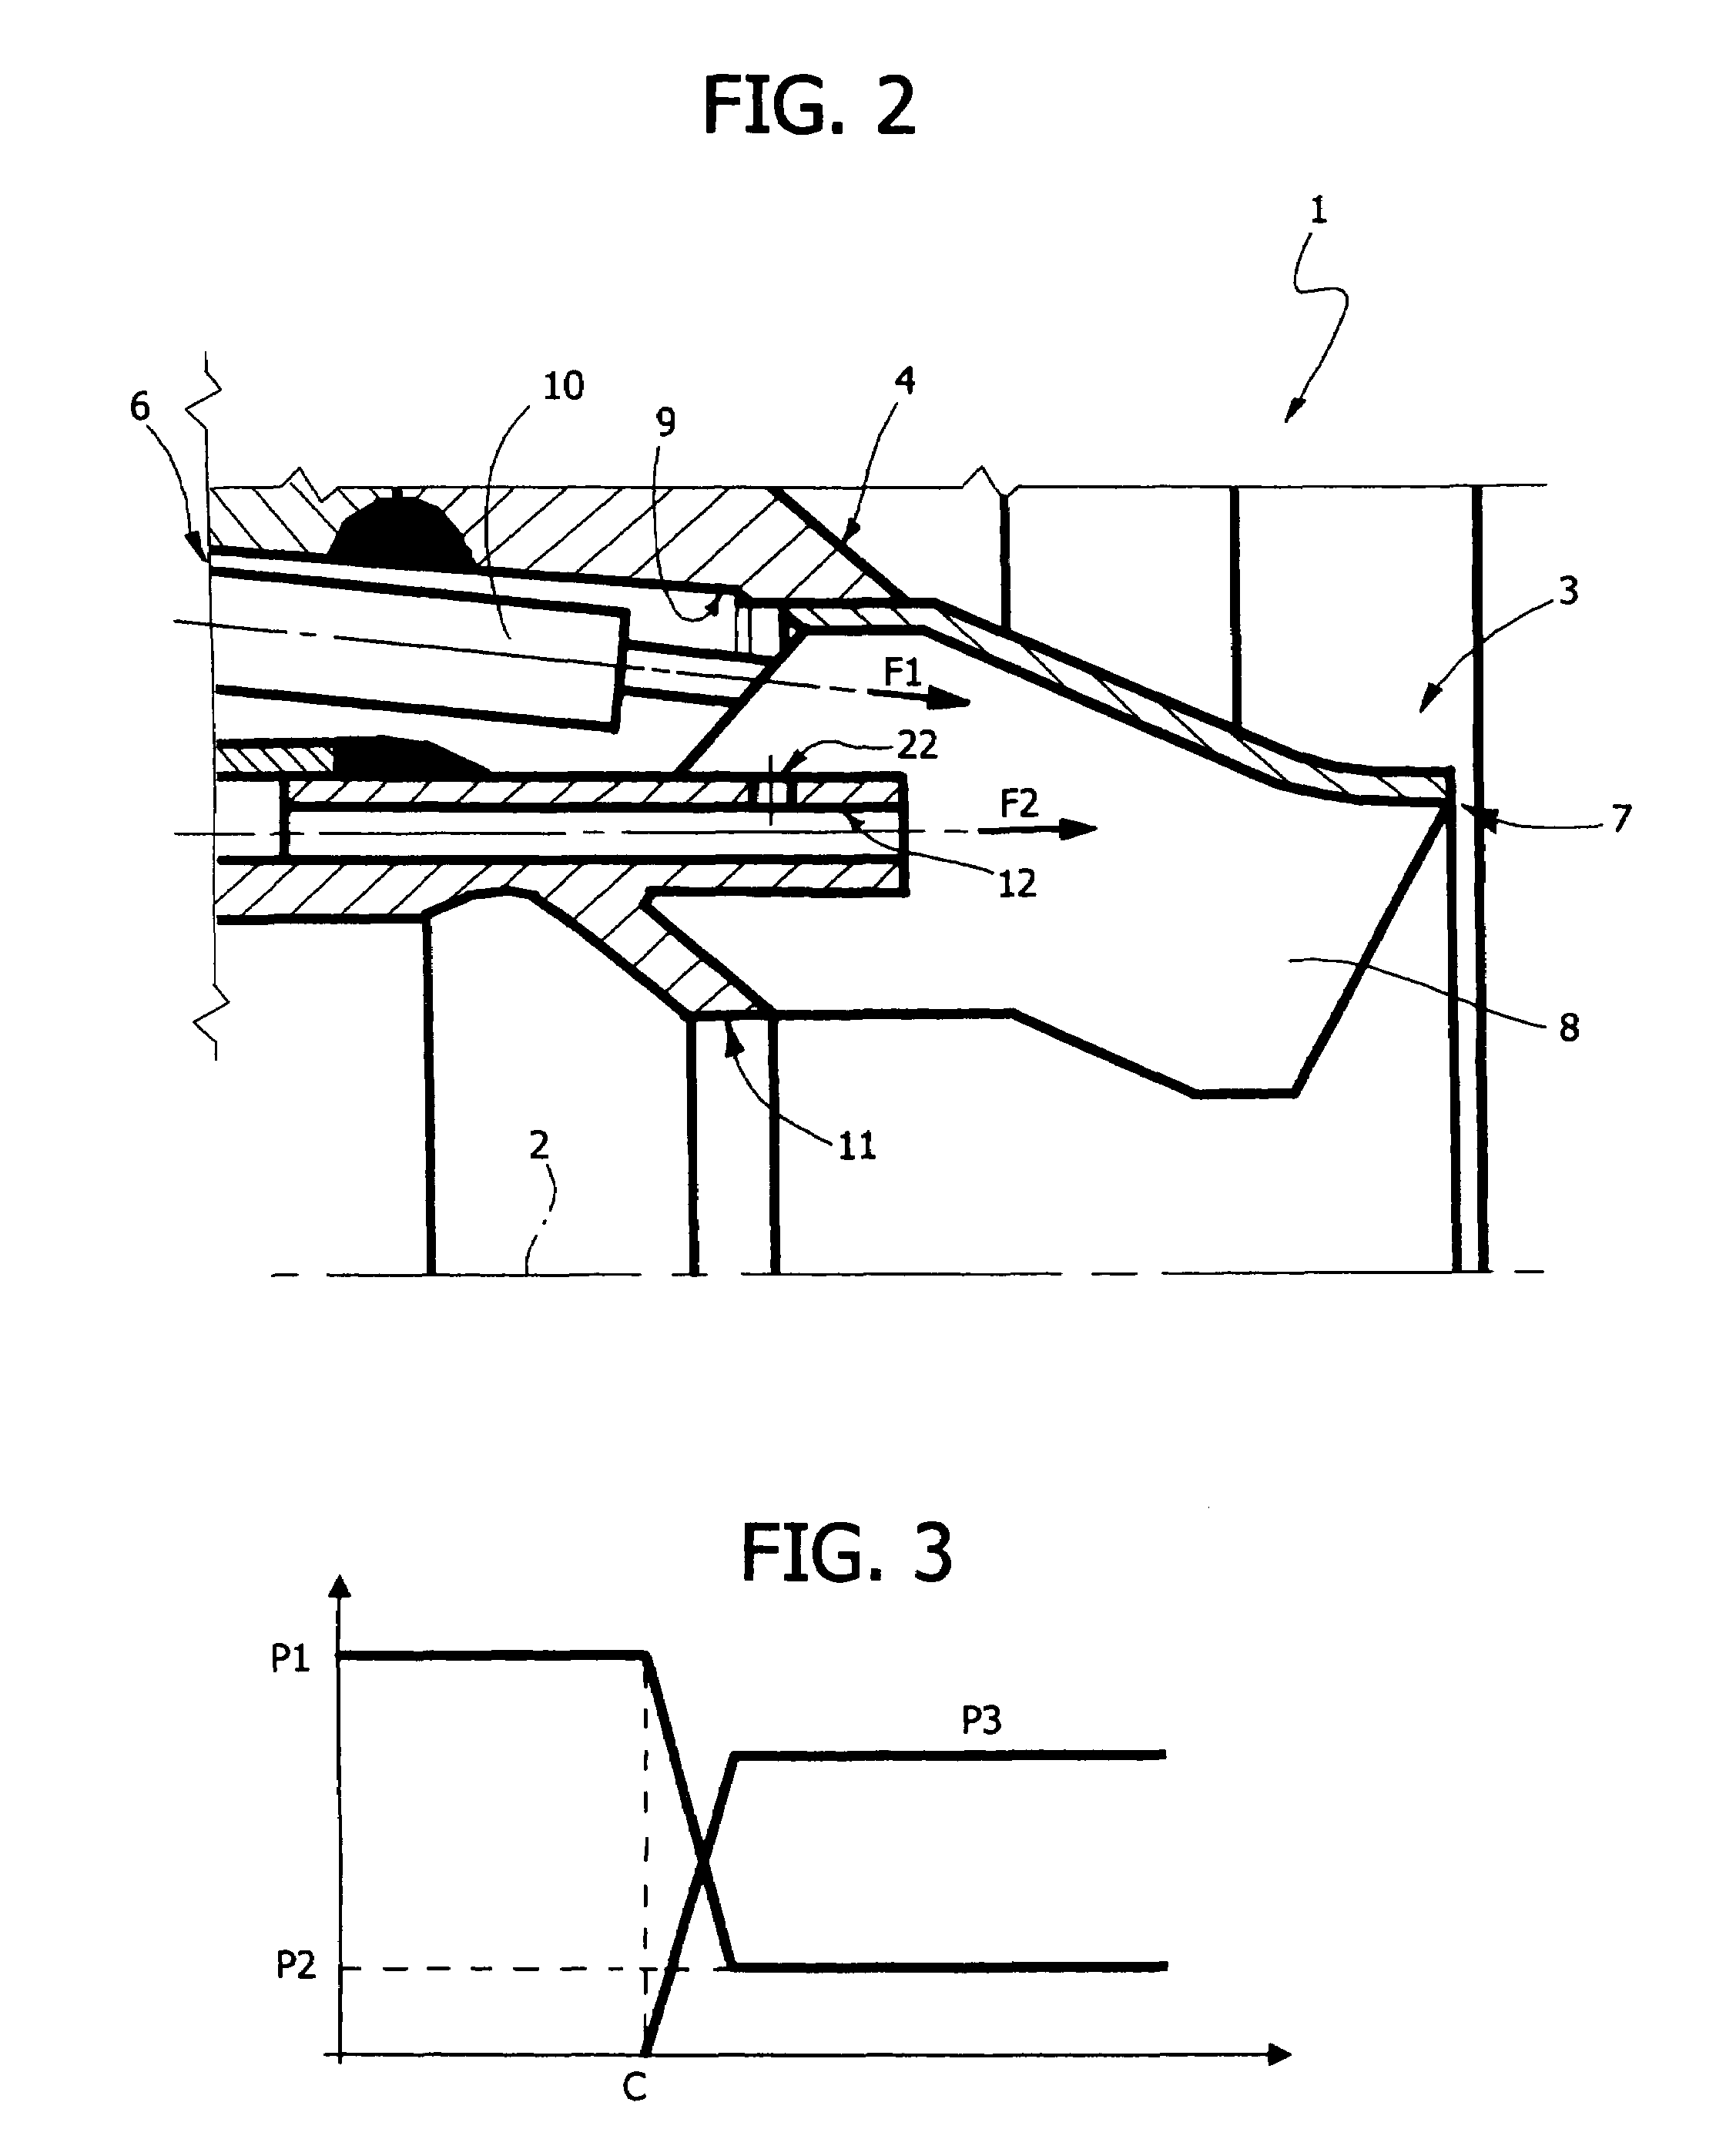 Method of controlling a gas combustor of a gas turbine